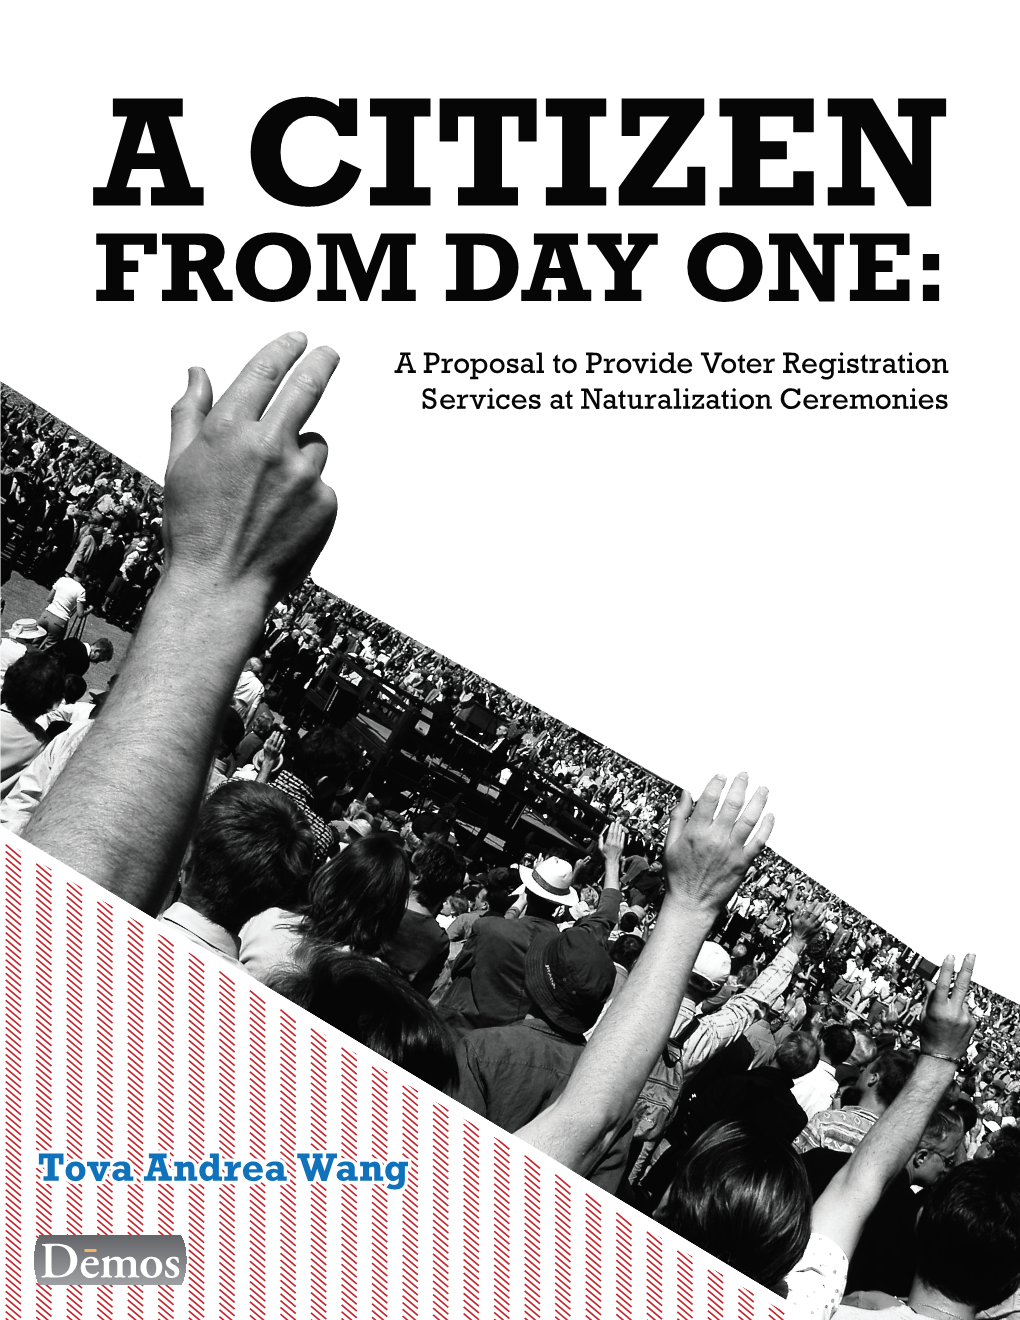 FROM DAY ONE: a Proposal to Provide Voter Registration Services at Naturalization Ceremonies